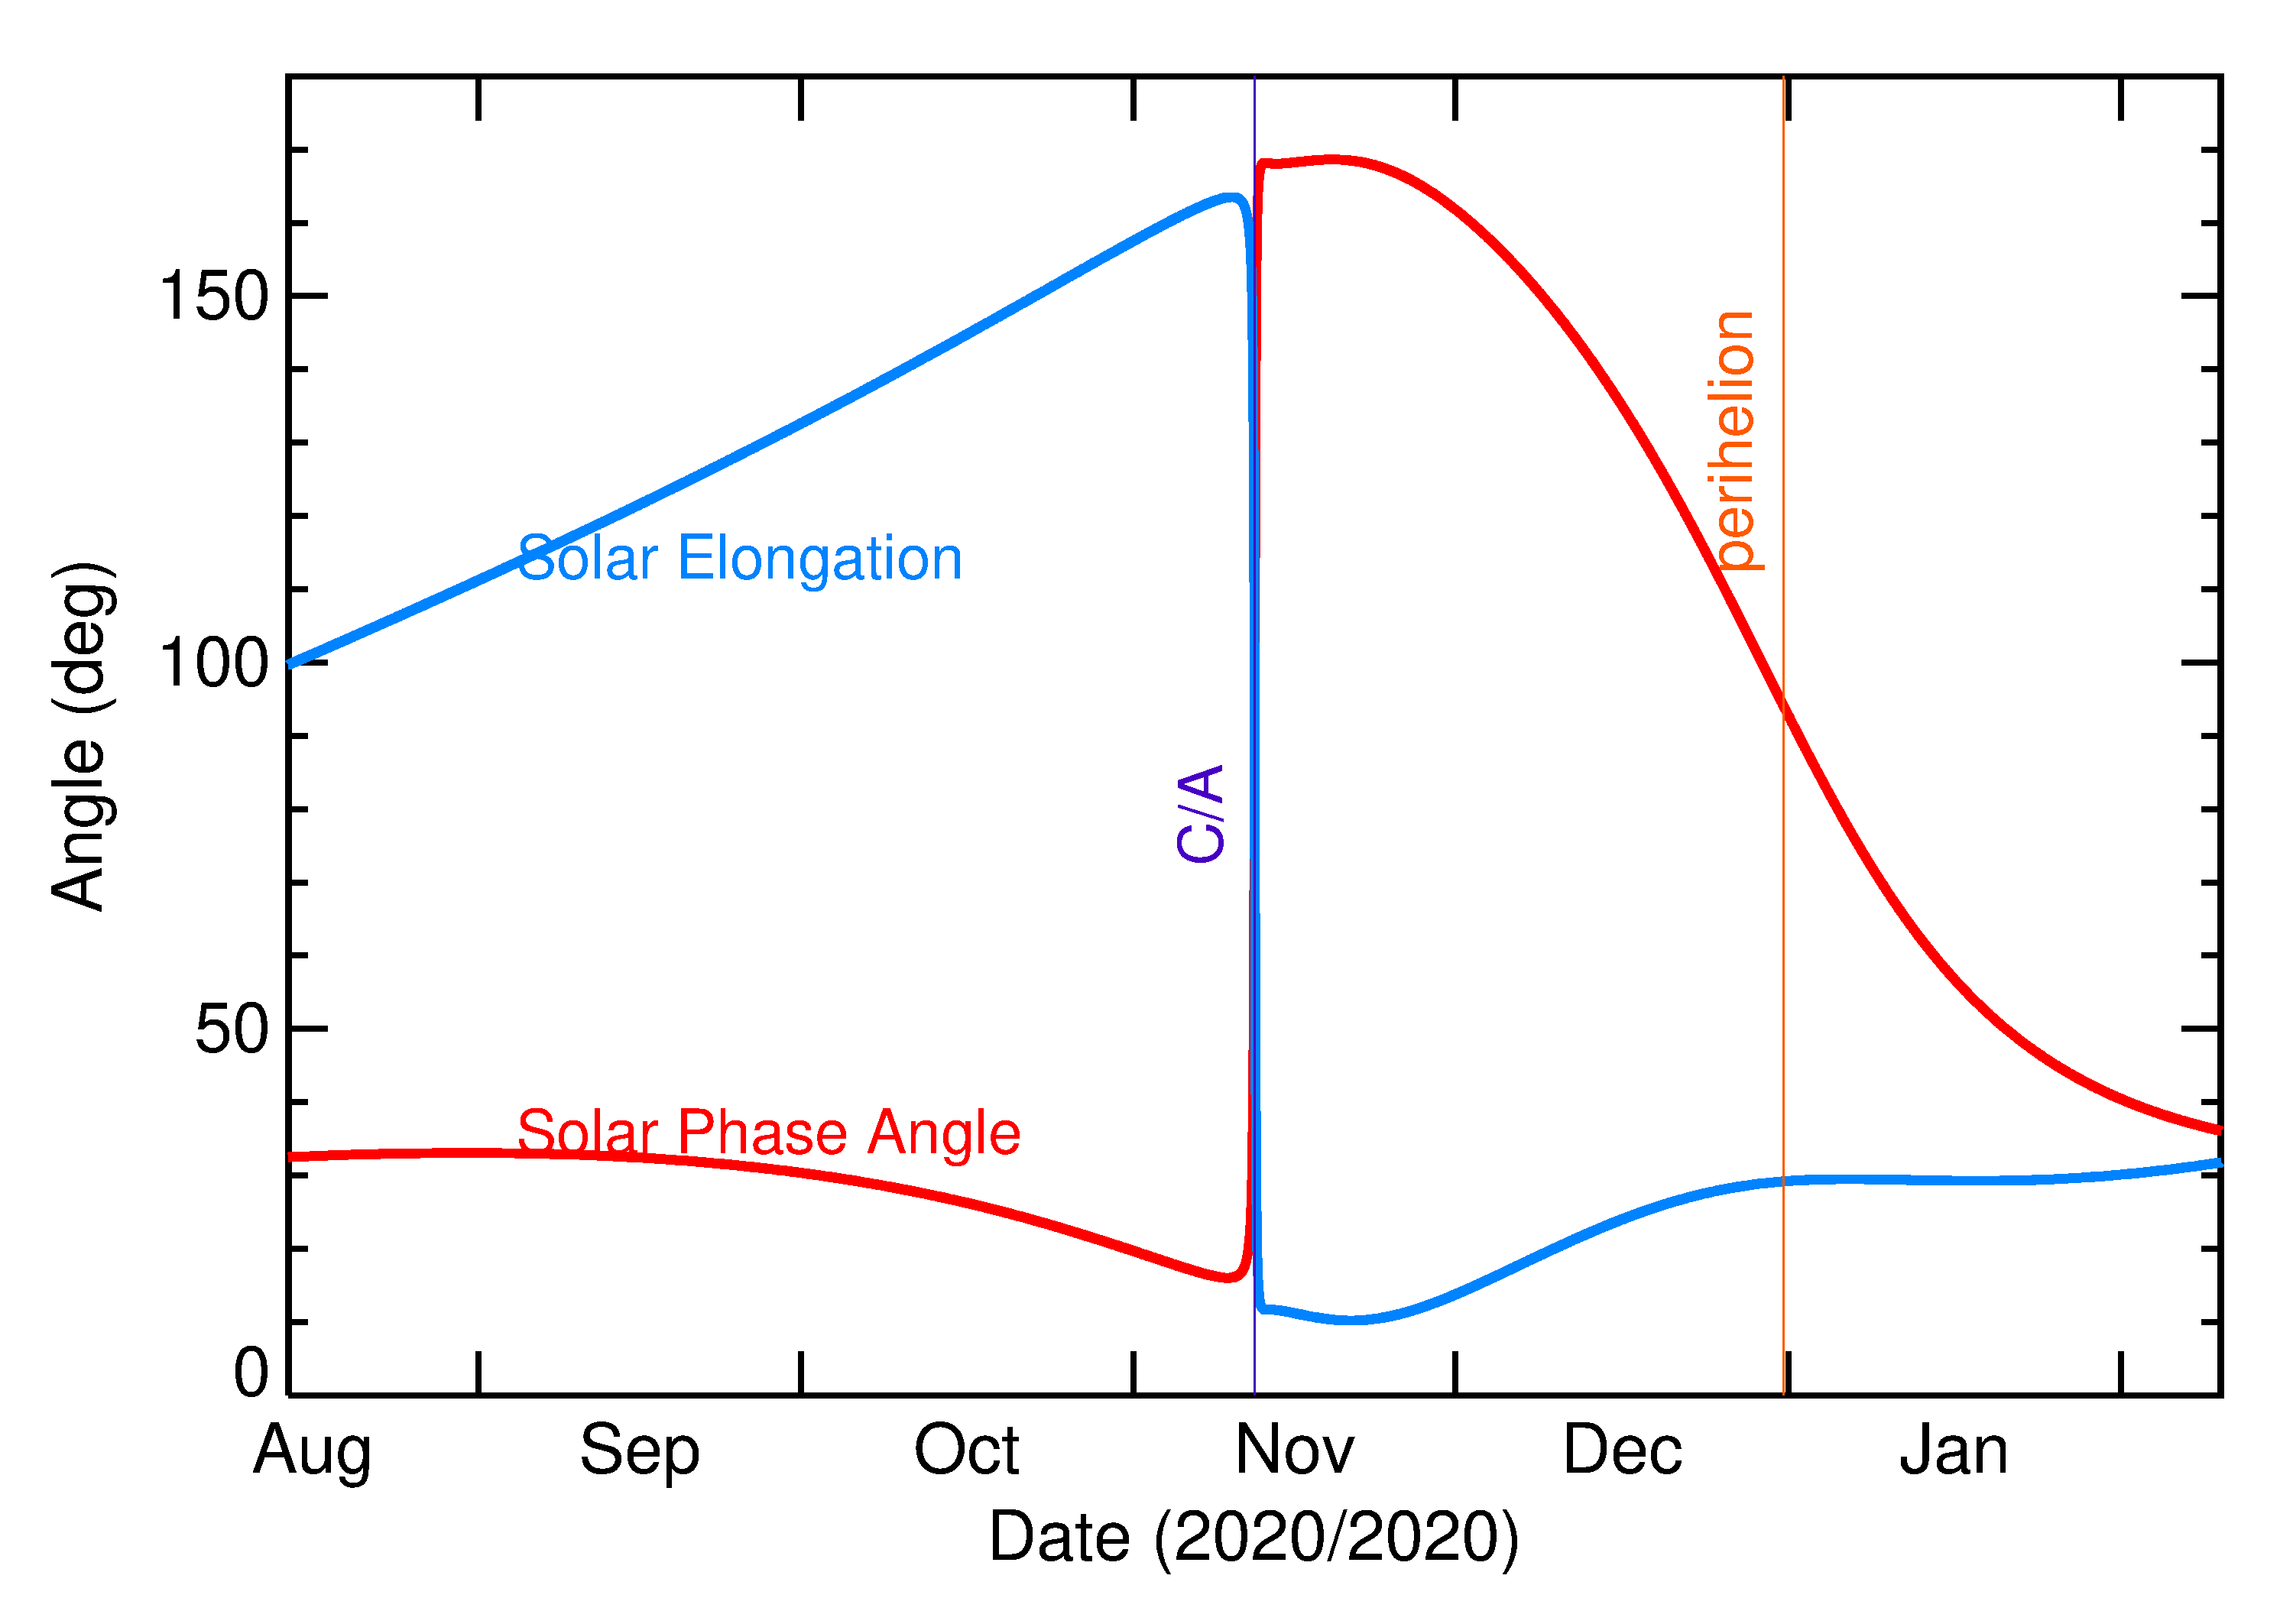 Solar Elongation and Solar Phase Angle of 2020 VP1 in the months around closest approach